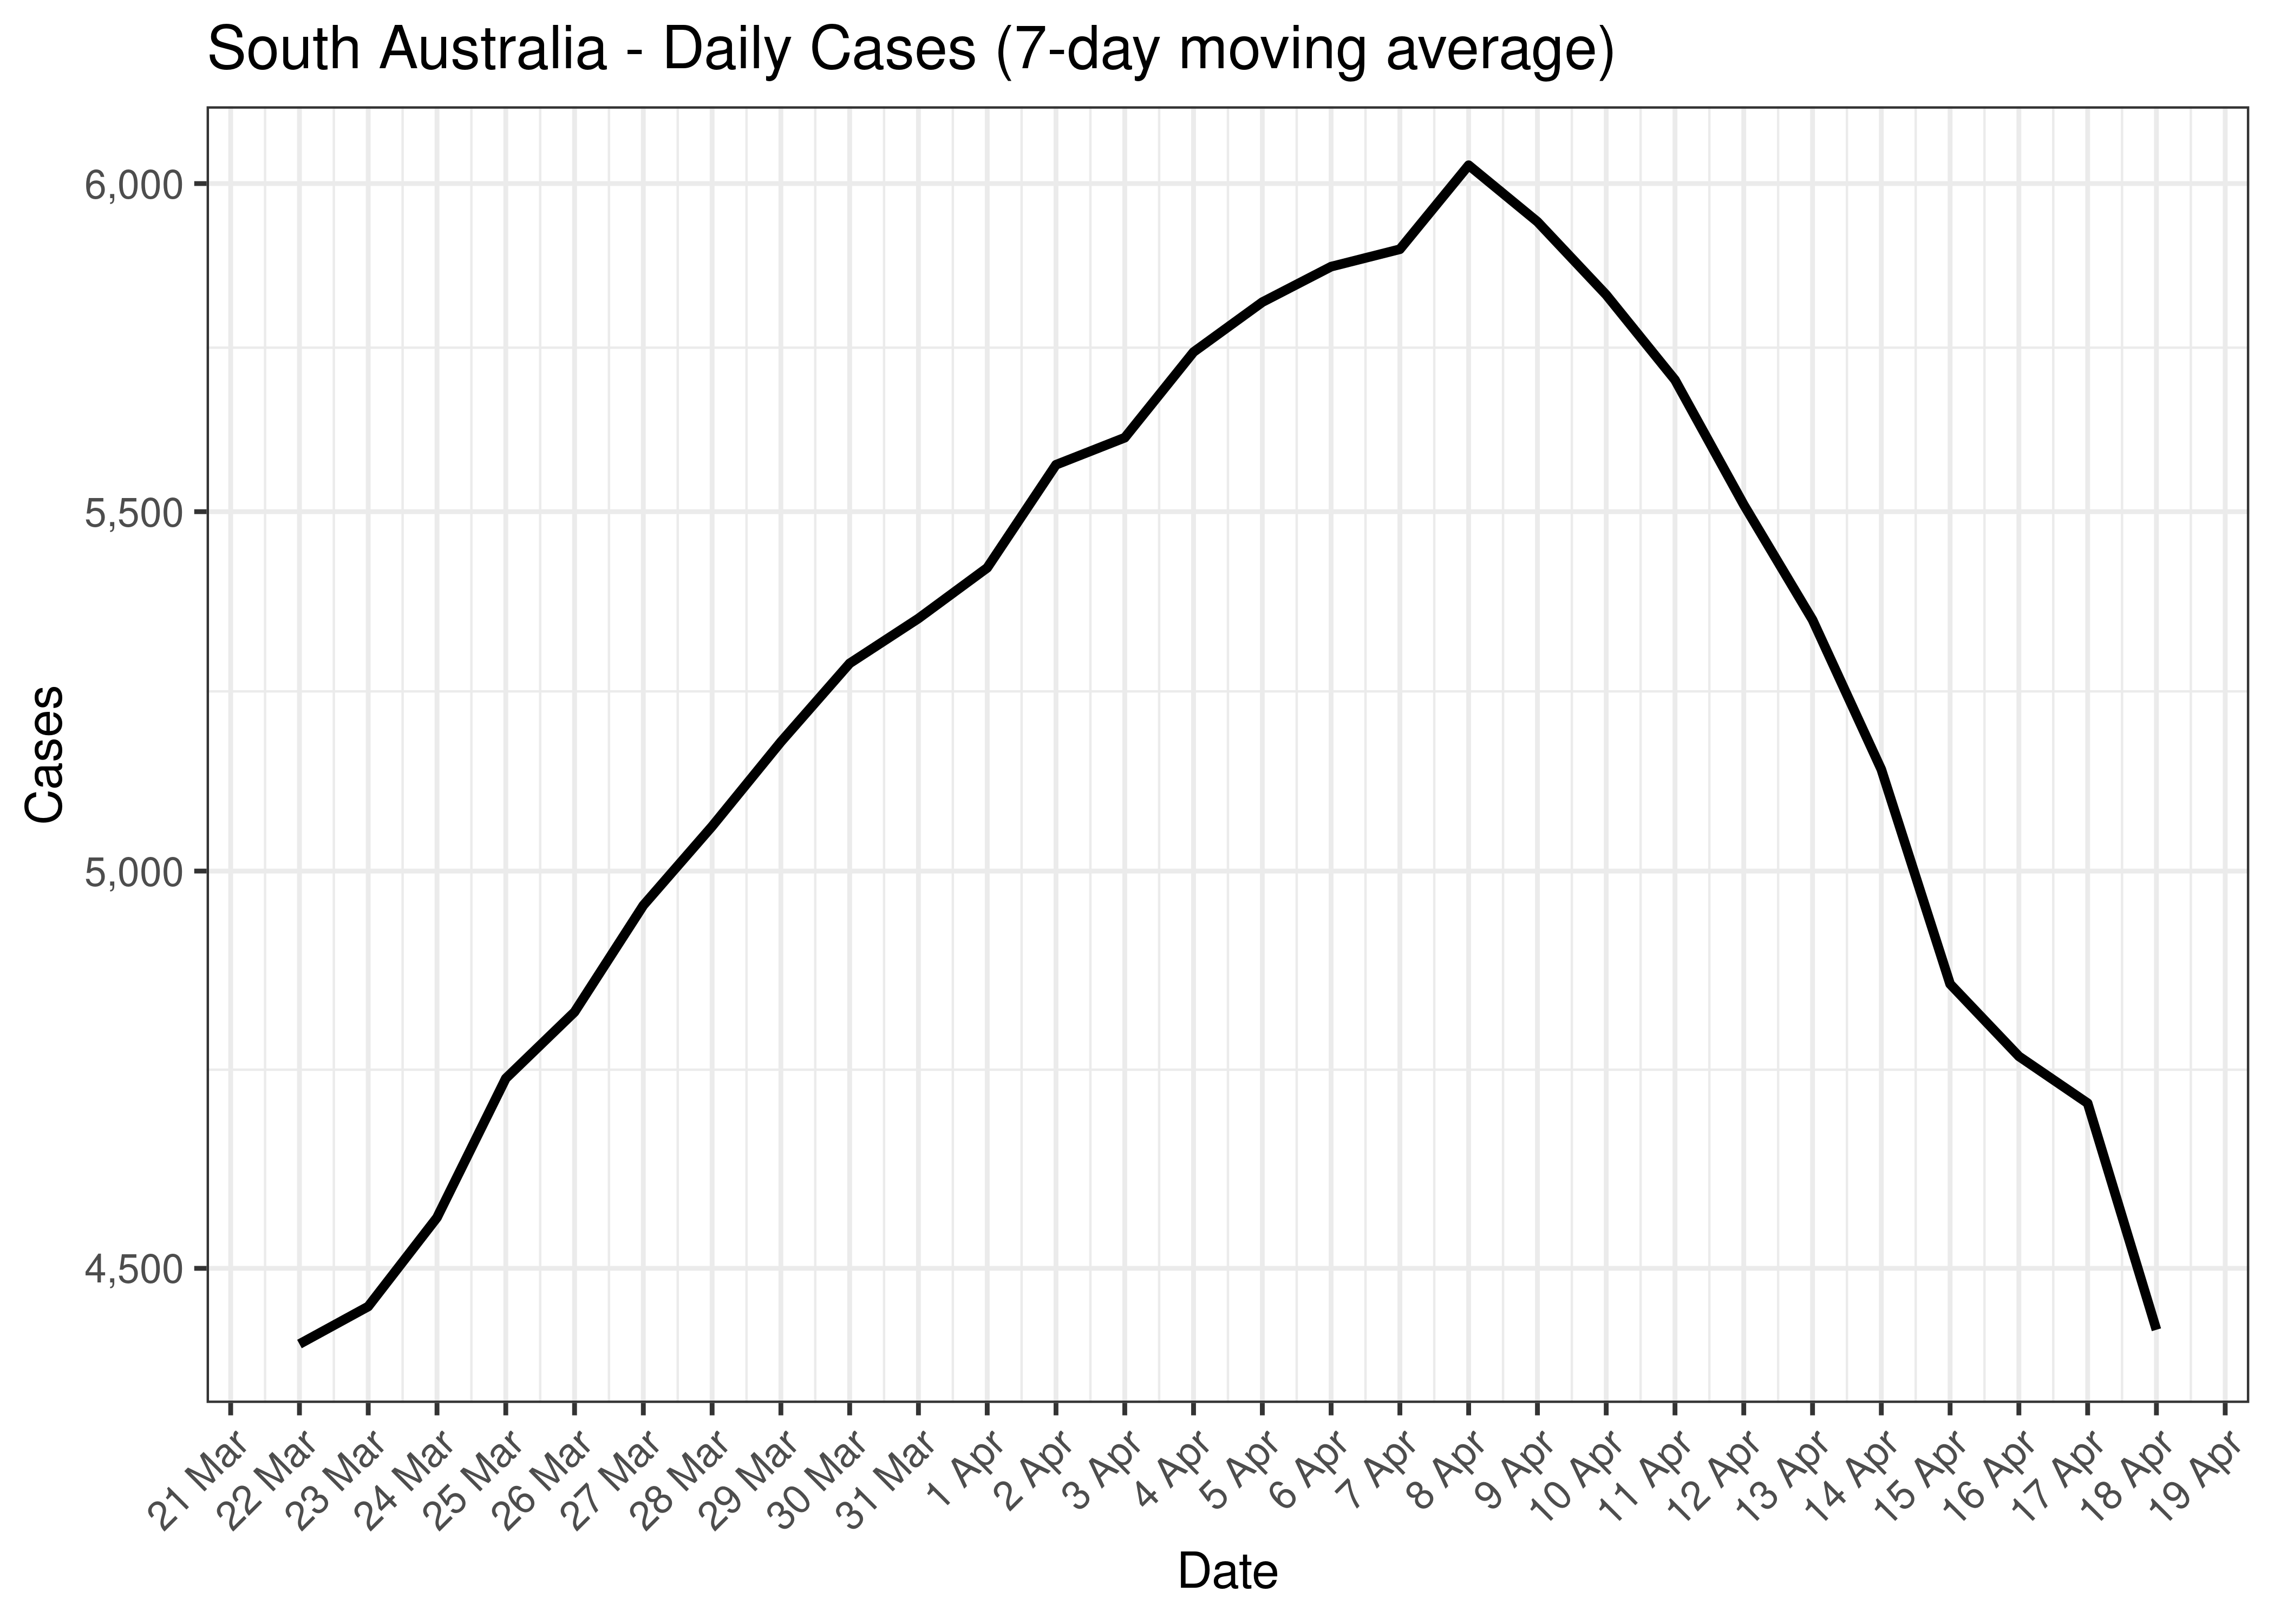 South Australia - Daily Cases for Last 30-days (7-day moving average)